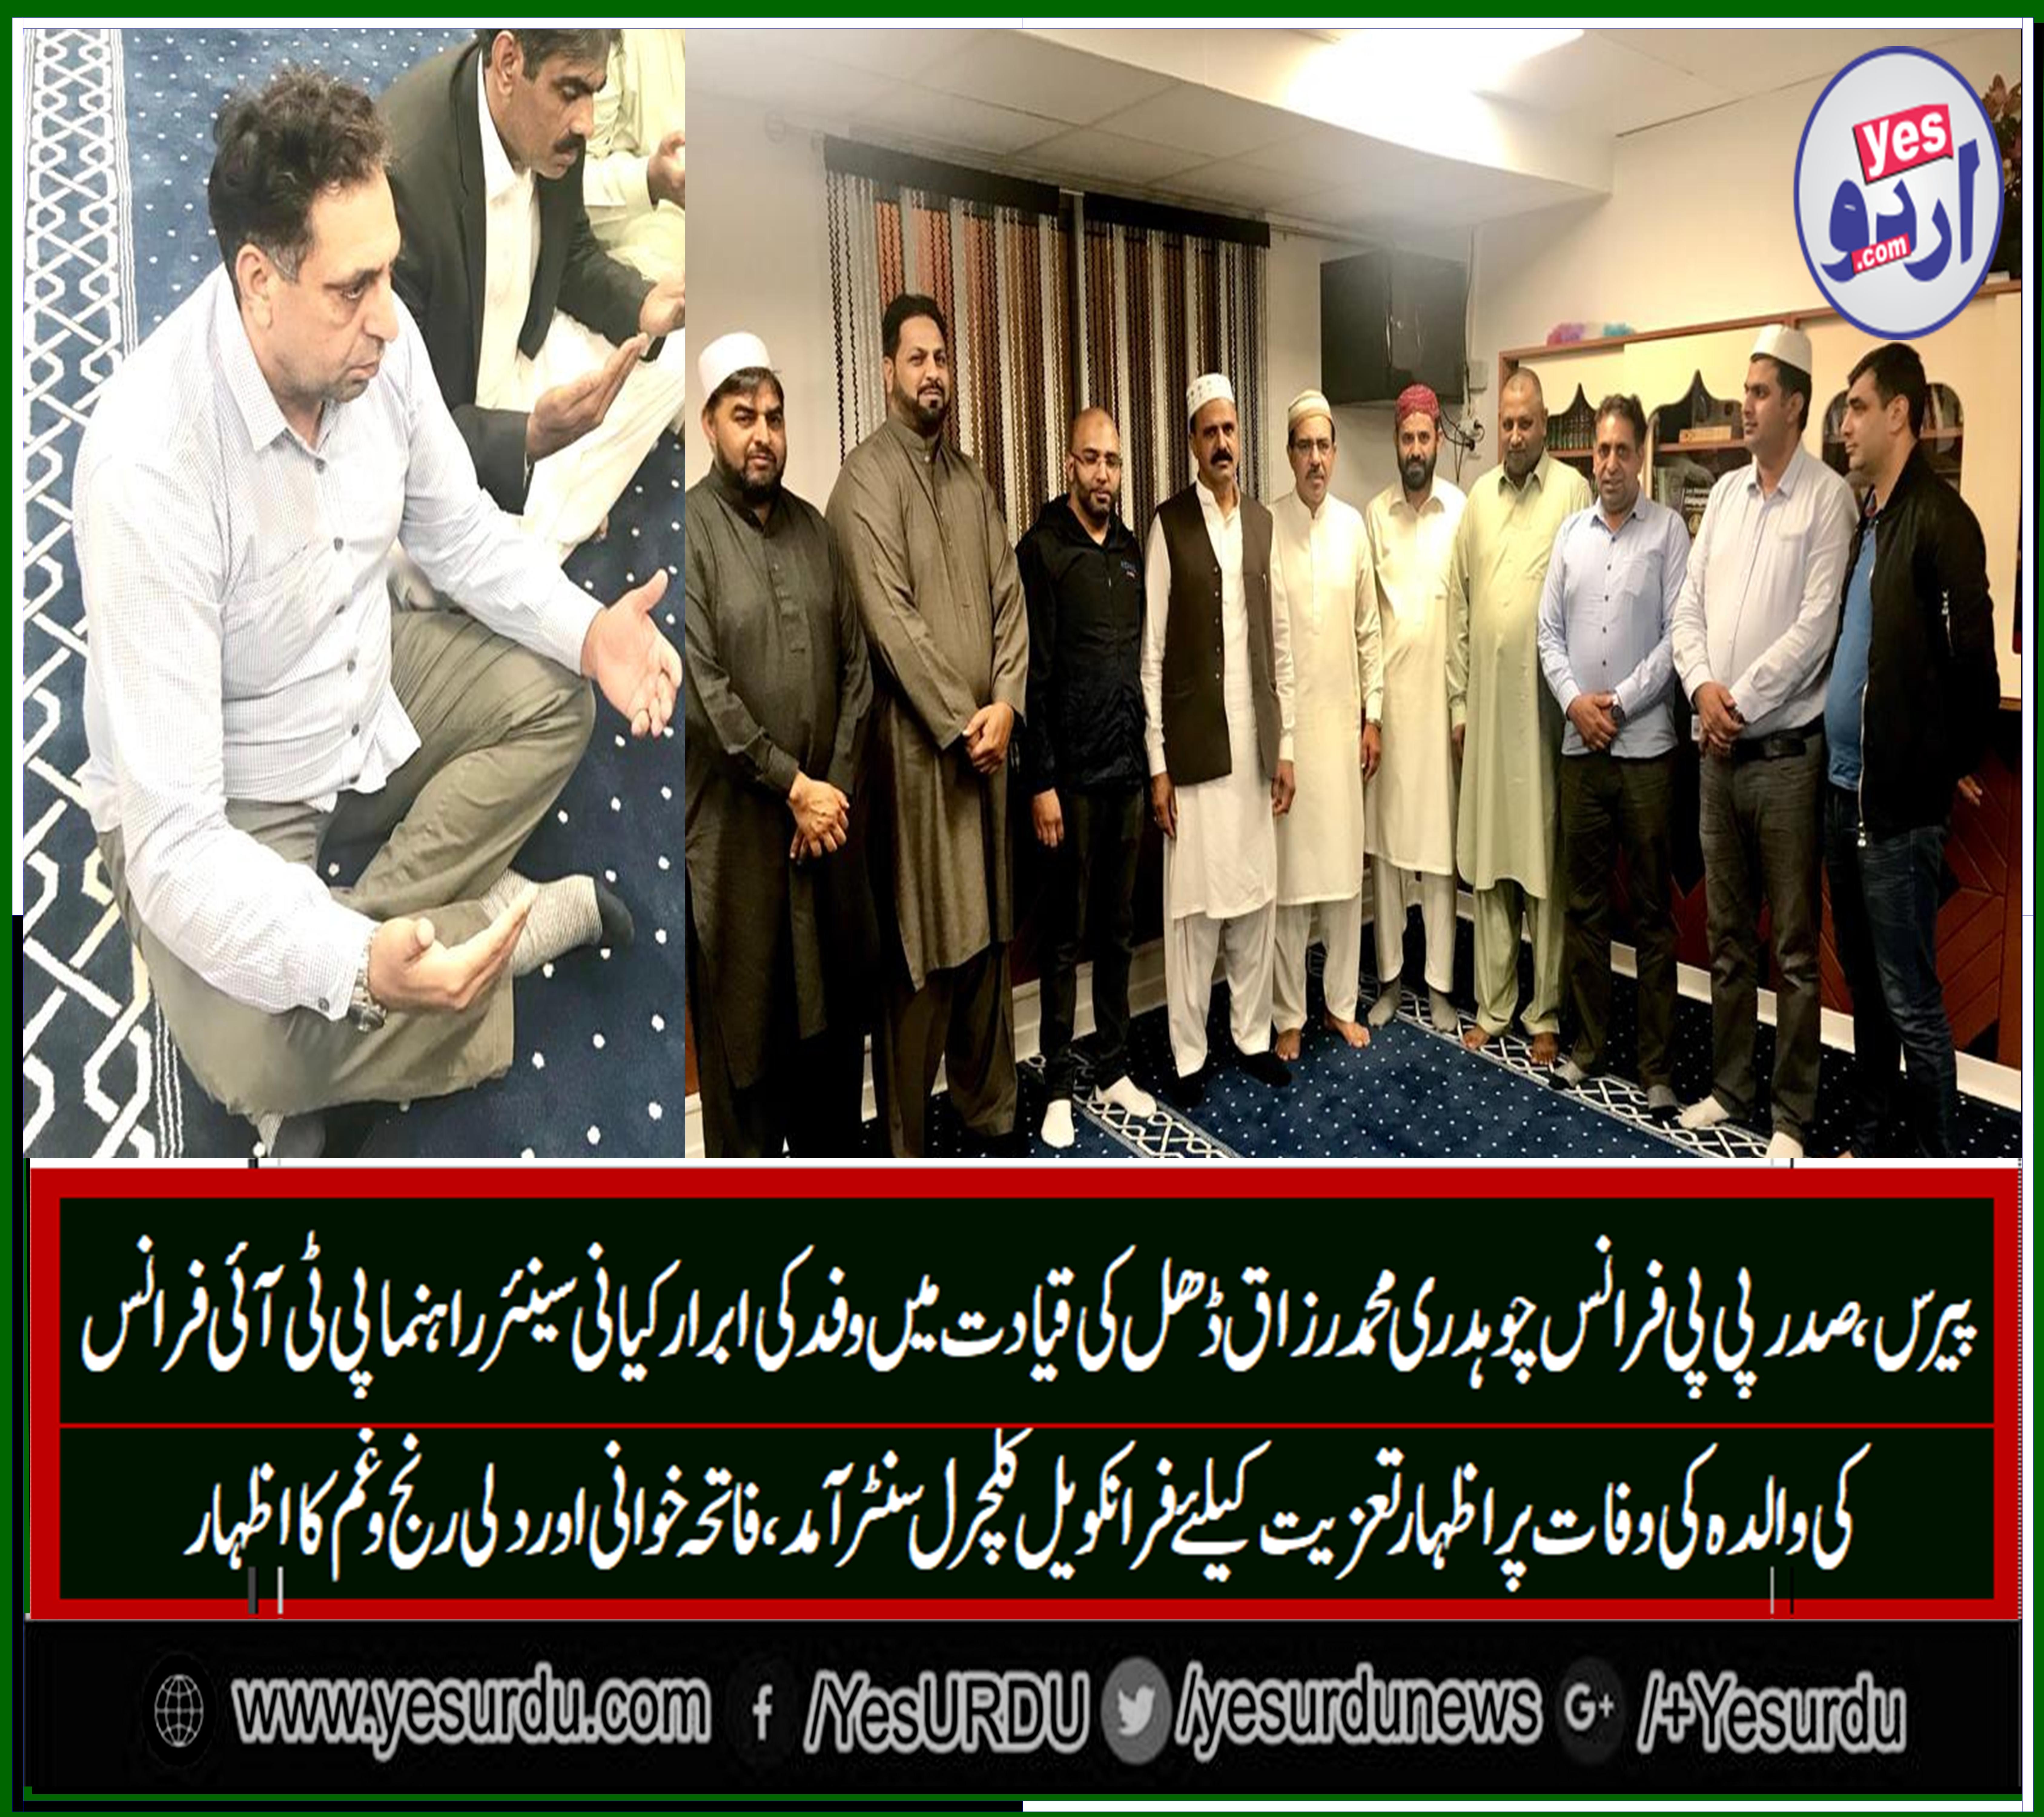 ch razaq dhal, along, with, delegation, visited, Frankwell, cultural center, for, condolence, on, death, of, mother, of, abrar kayani, senior, leader, PTI, France